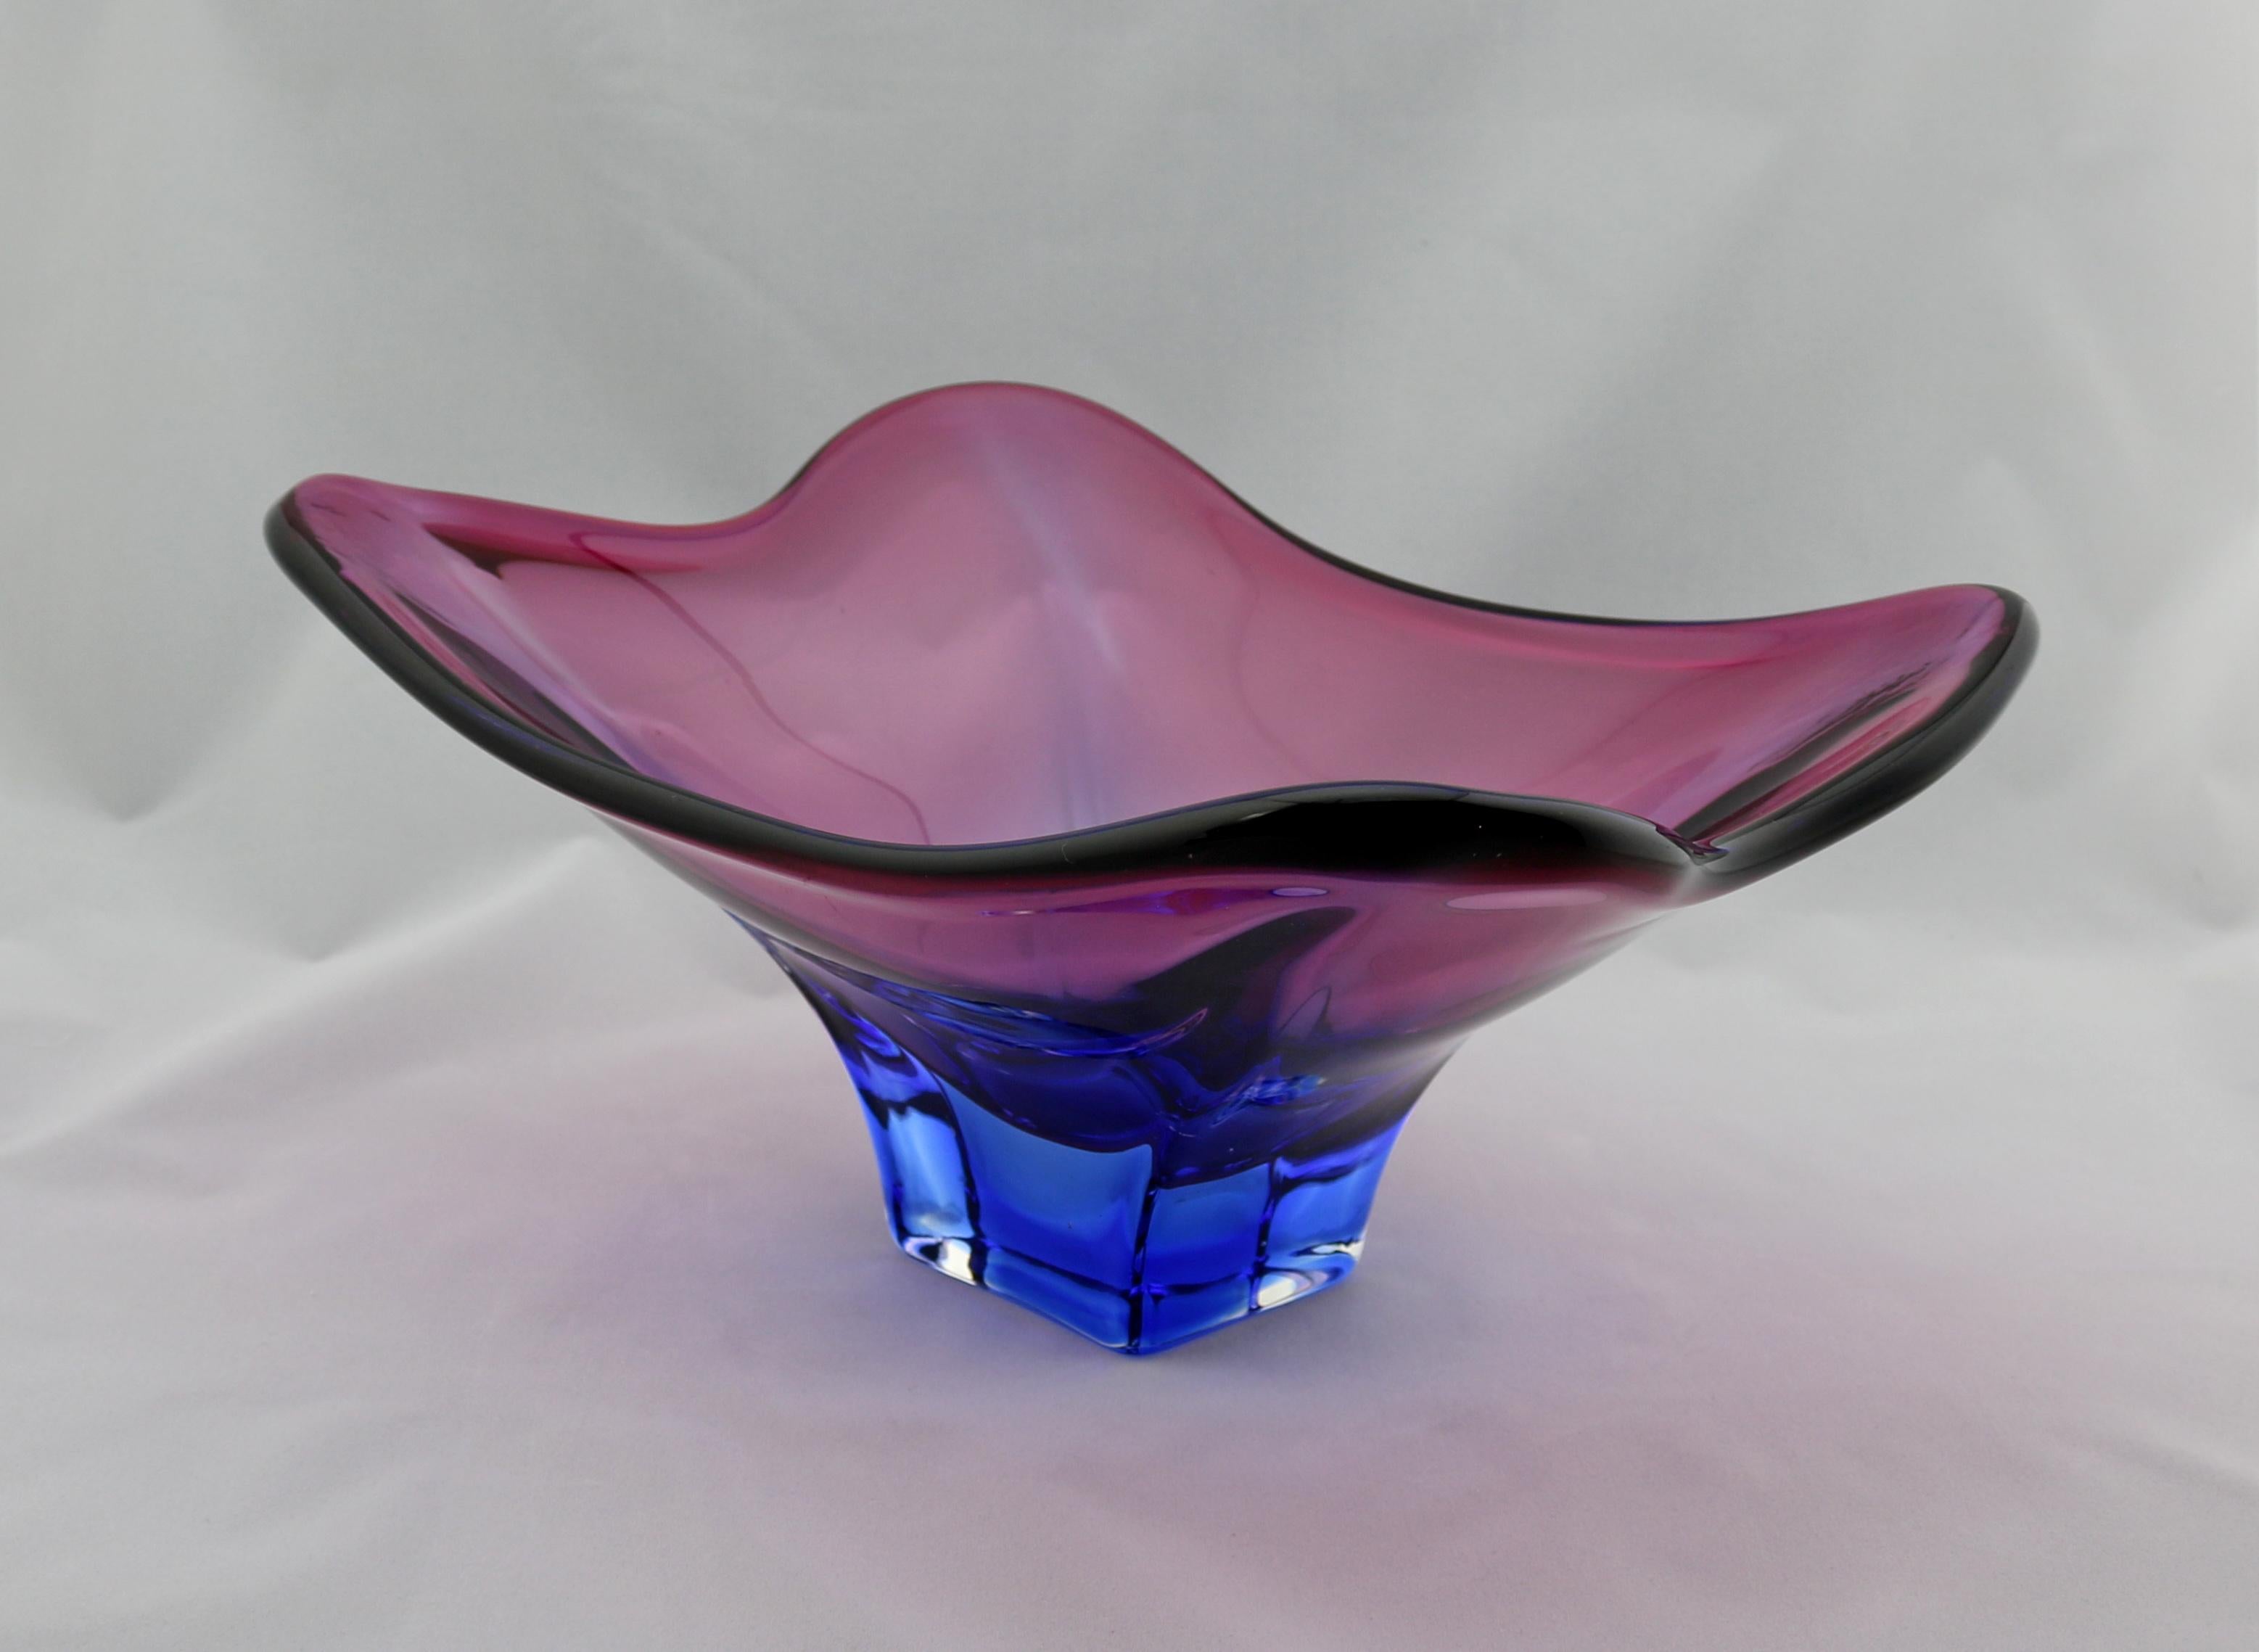 A beautiful small Murano glass fruit bowl made in Italy. It is of beautiful colors. A must have for all collectors of glassware. It is in immaculate condition.